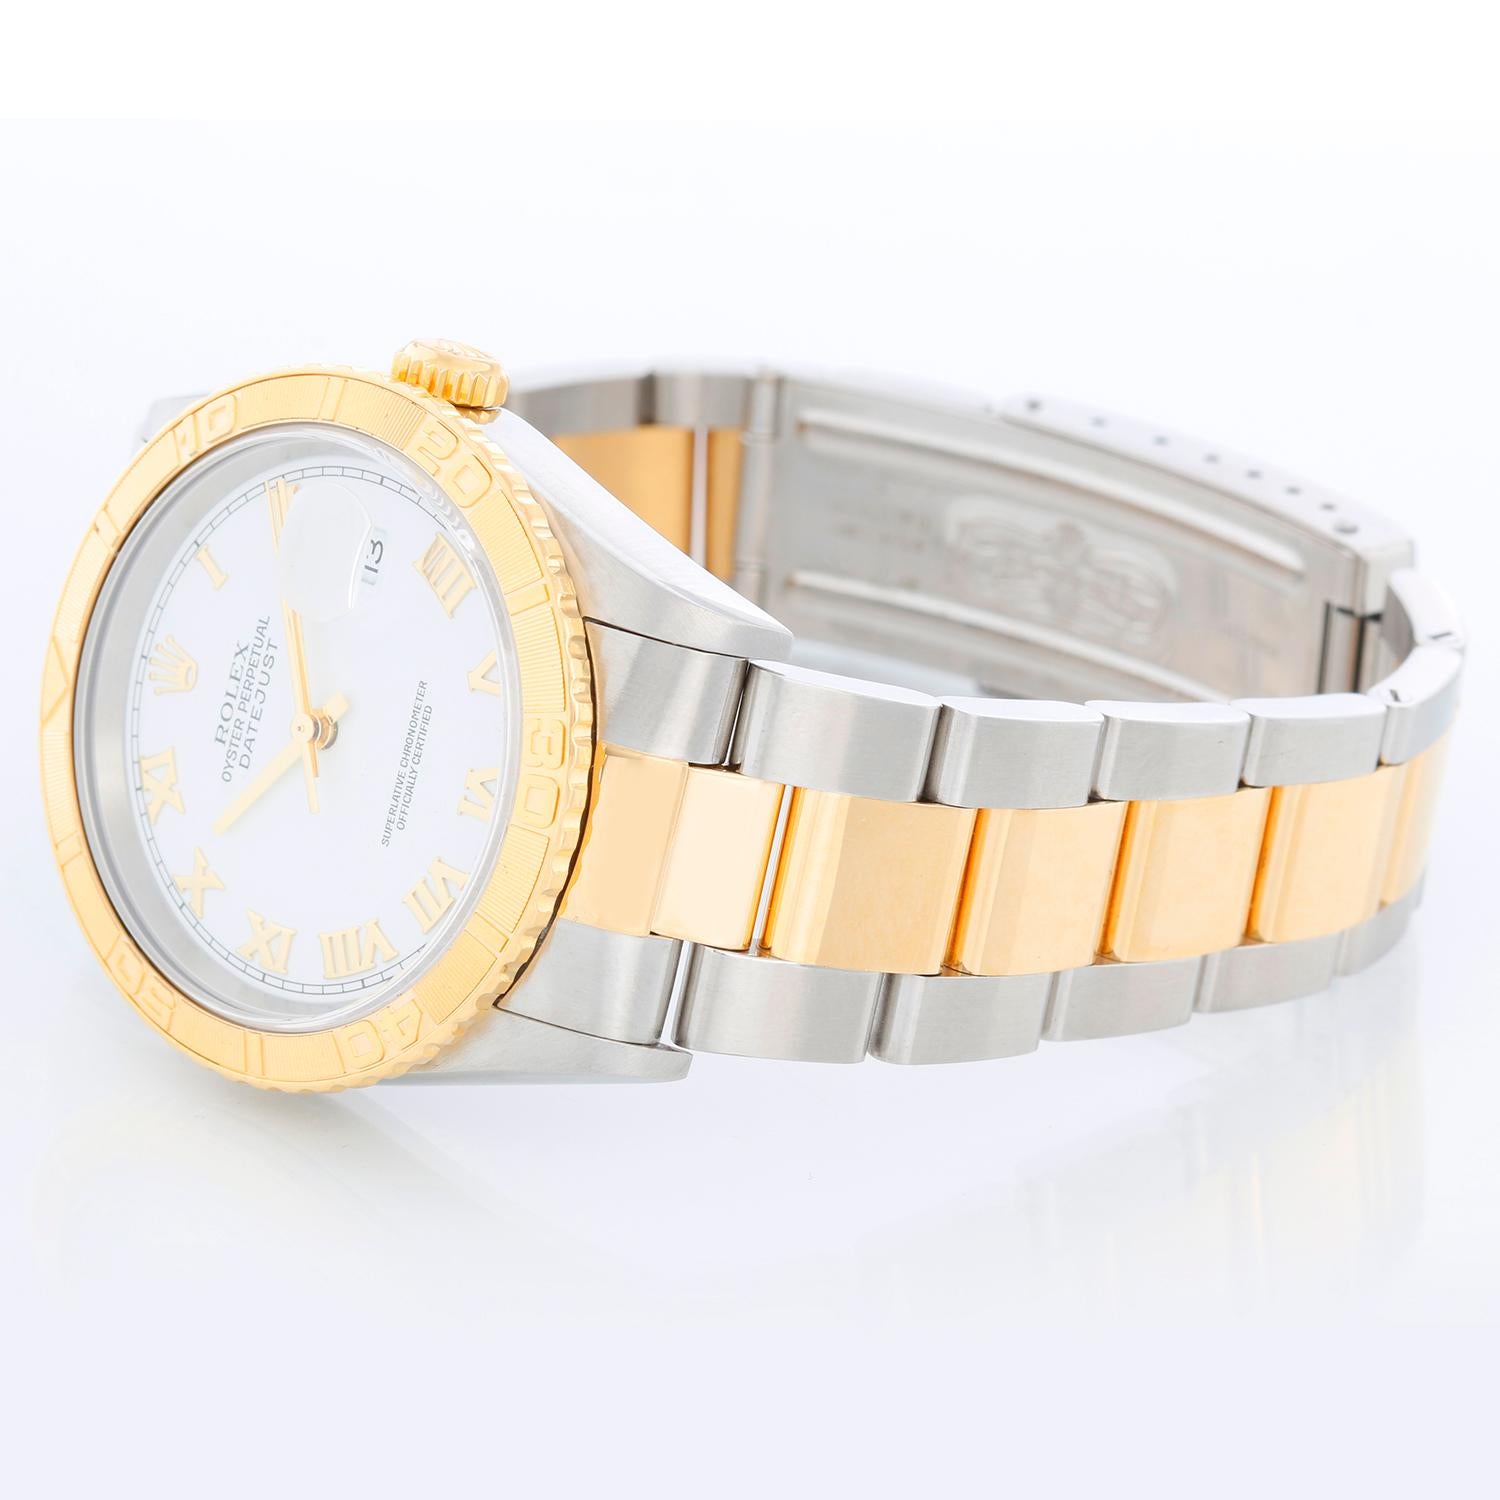 Rolex Turnograph Men's 2-Tone Watch 16263 - Automatic winding, Quickset, sapphire crystal. Stainless steel case with 18k yellow gold bezel. White dial with roman numerals. Stainless steel and 18k yellow gold Jubilee bracelet. Pre-owned with custom